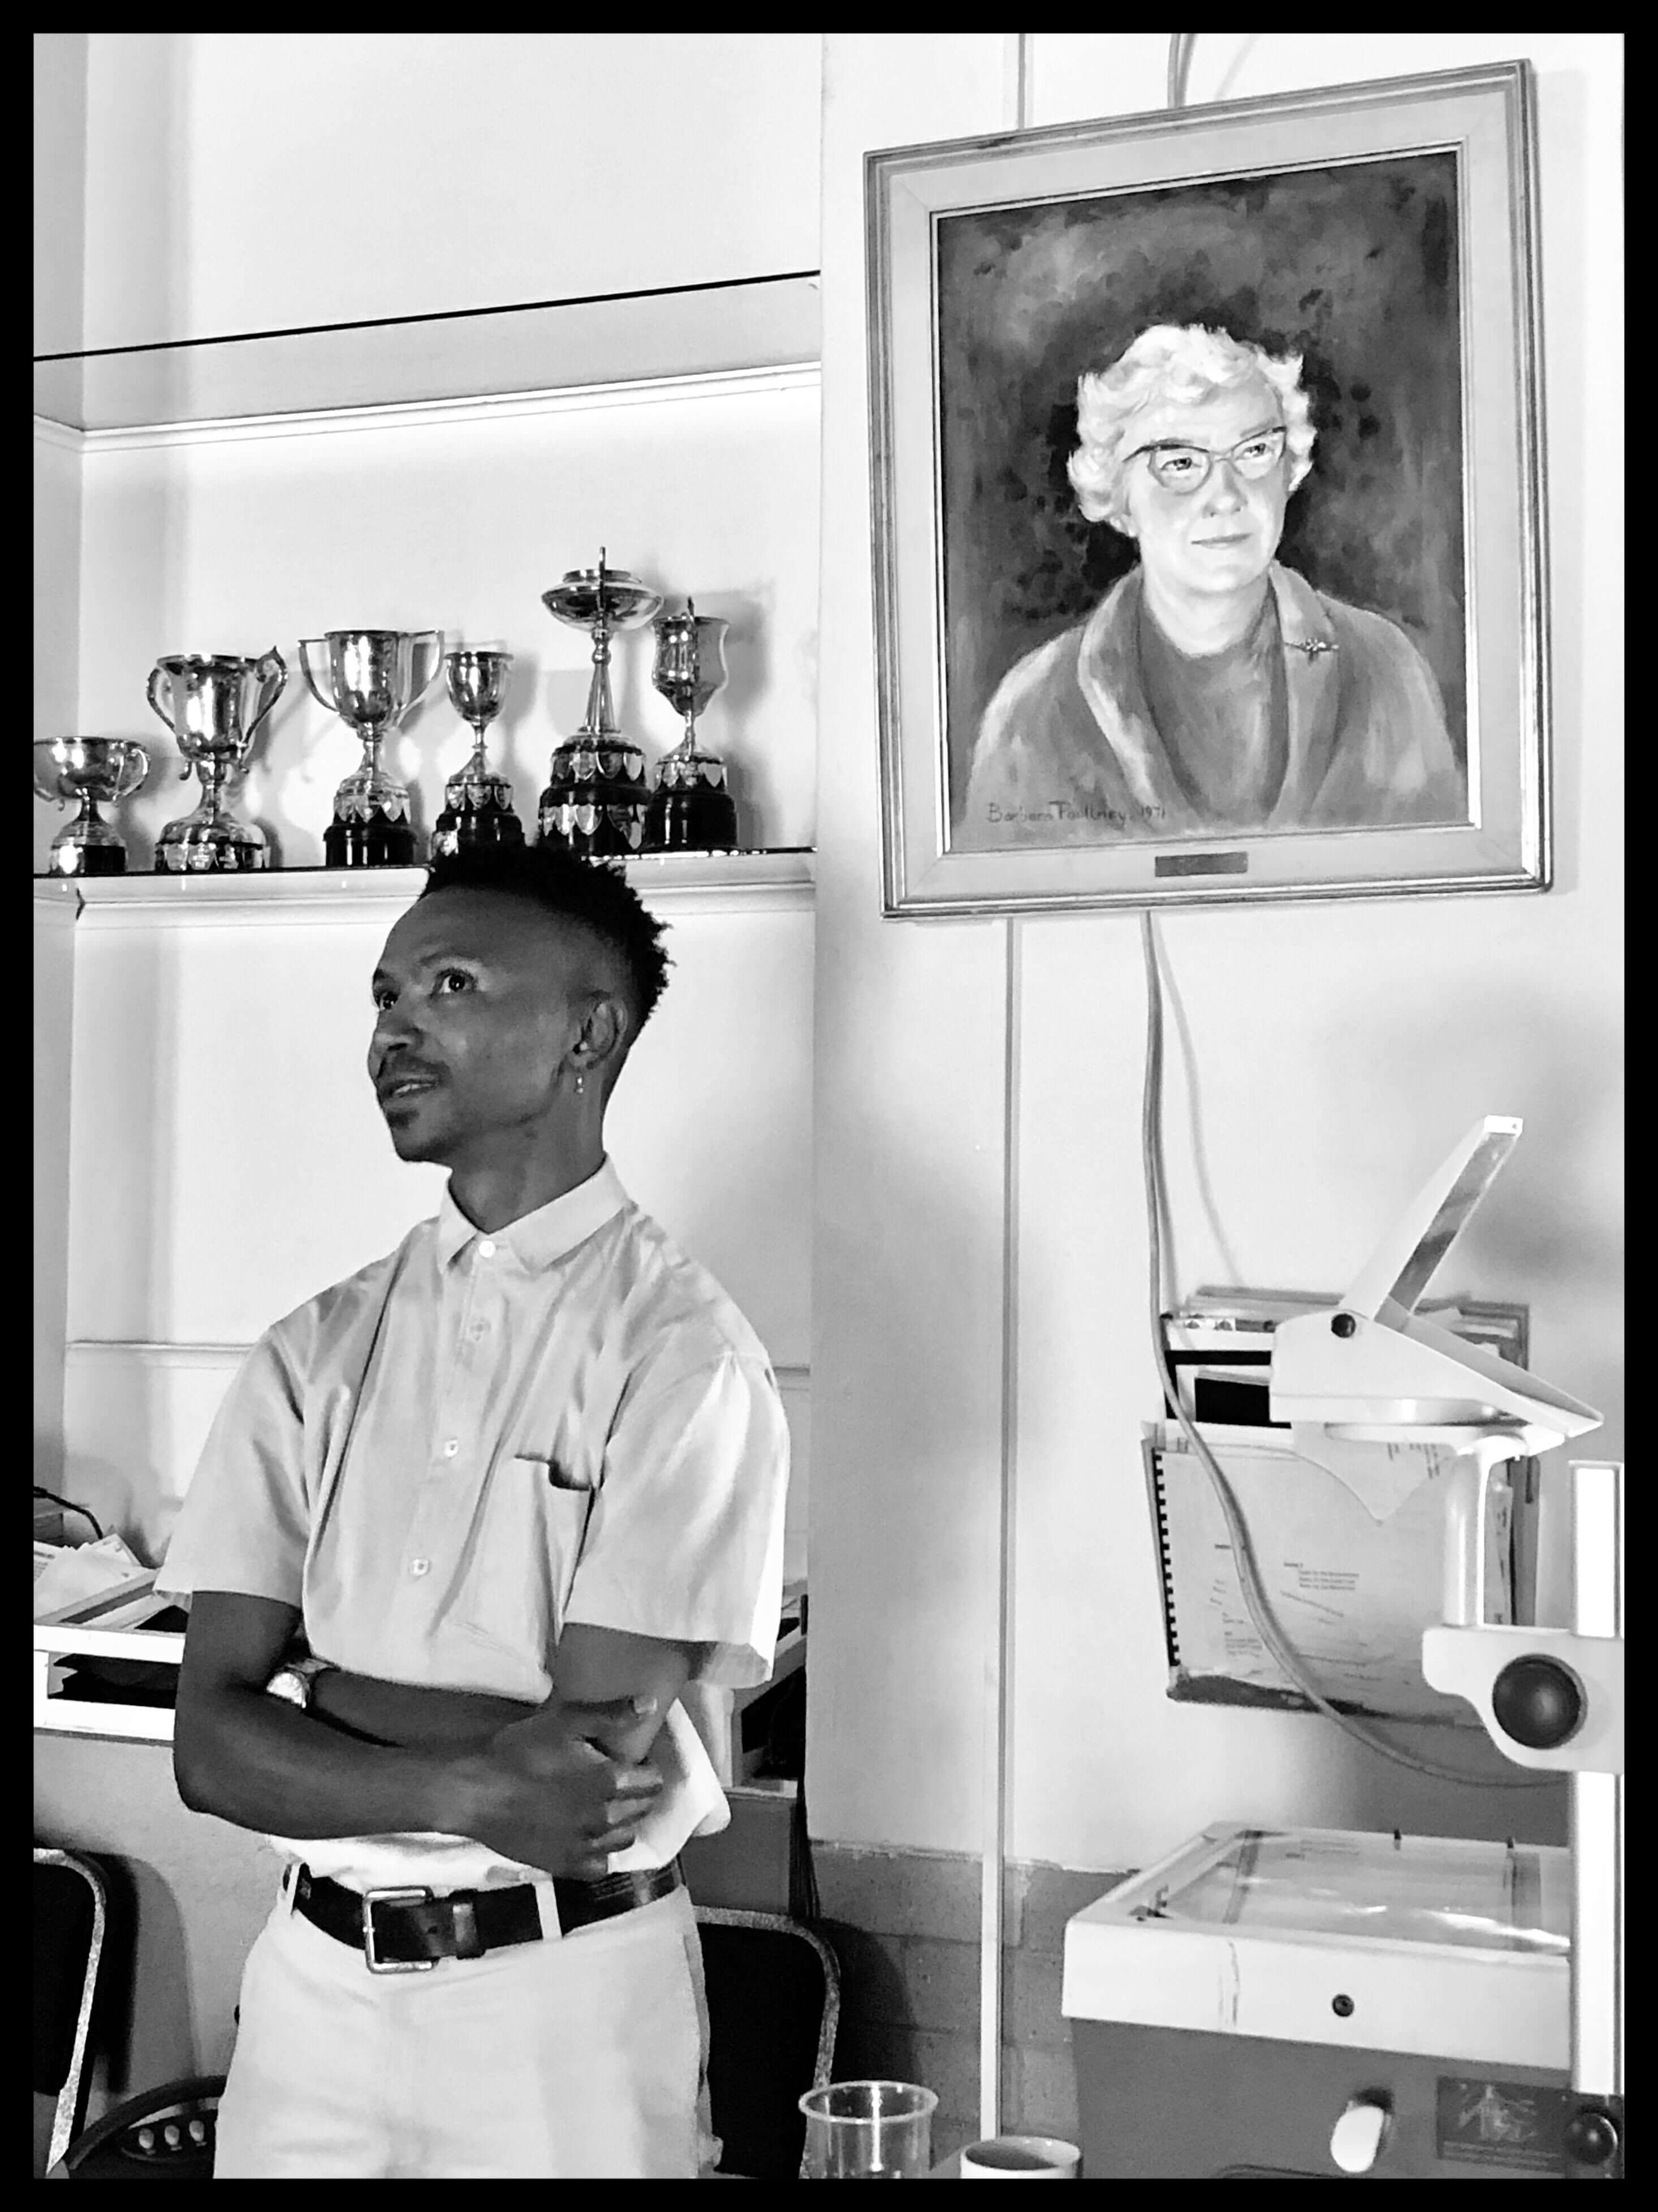 Still from Milisuthando (working title). A man is standing in front of a bookshelf with crossed arms. There is a portrait of an elderly woman to his left and trophies on a shelf to his right. Black and white photo.